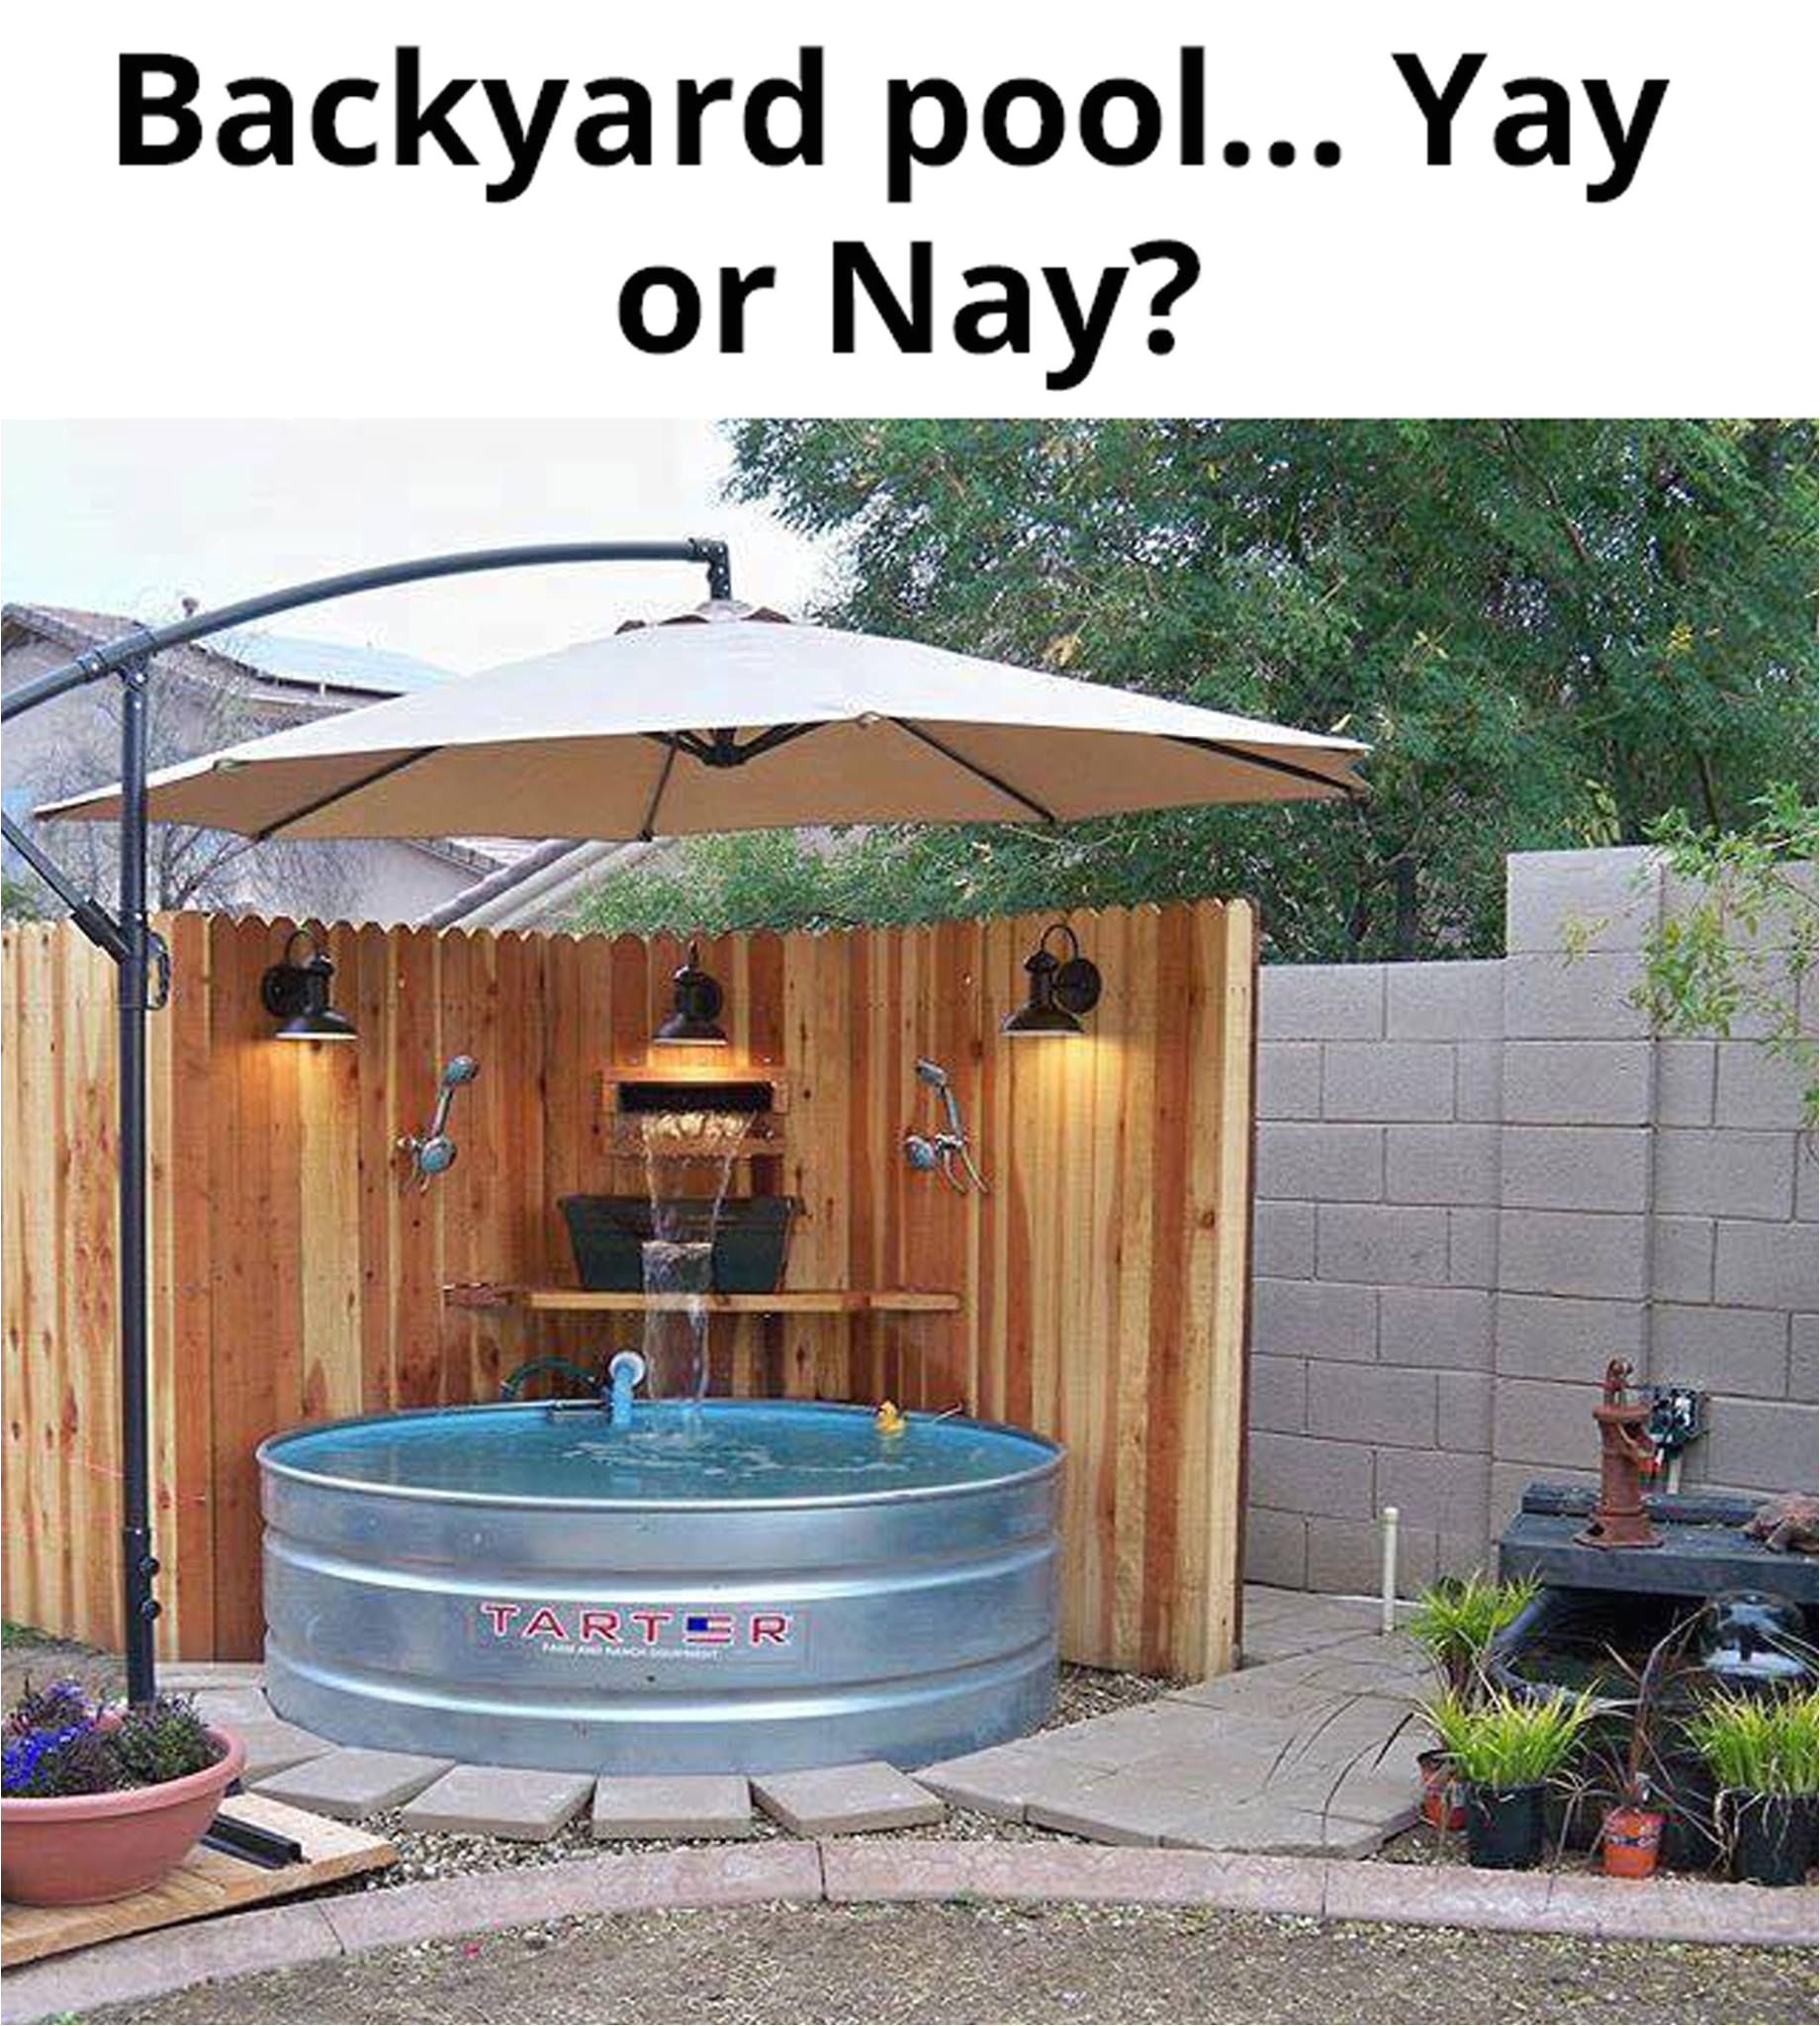 Outdoor Stock Tank Bathtub 8 Rad Plumbing and Fixture Ideas to Jazz Up Your Home In